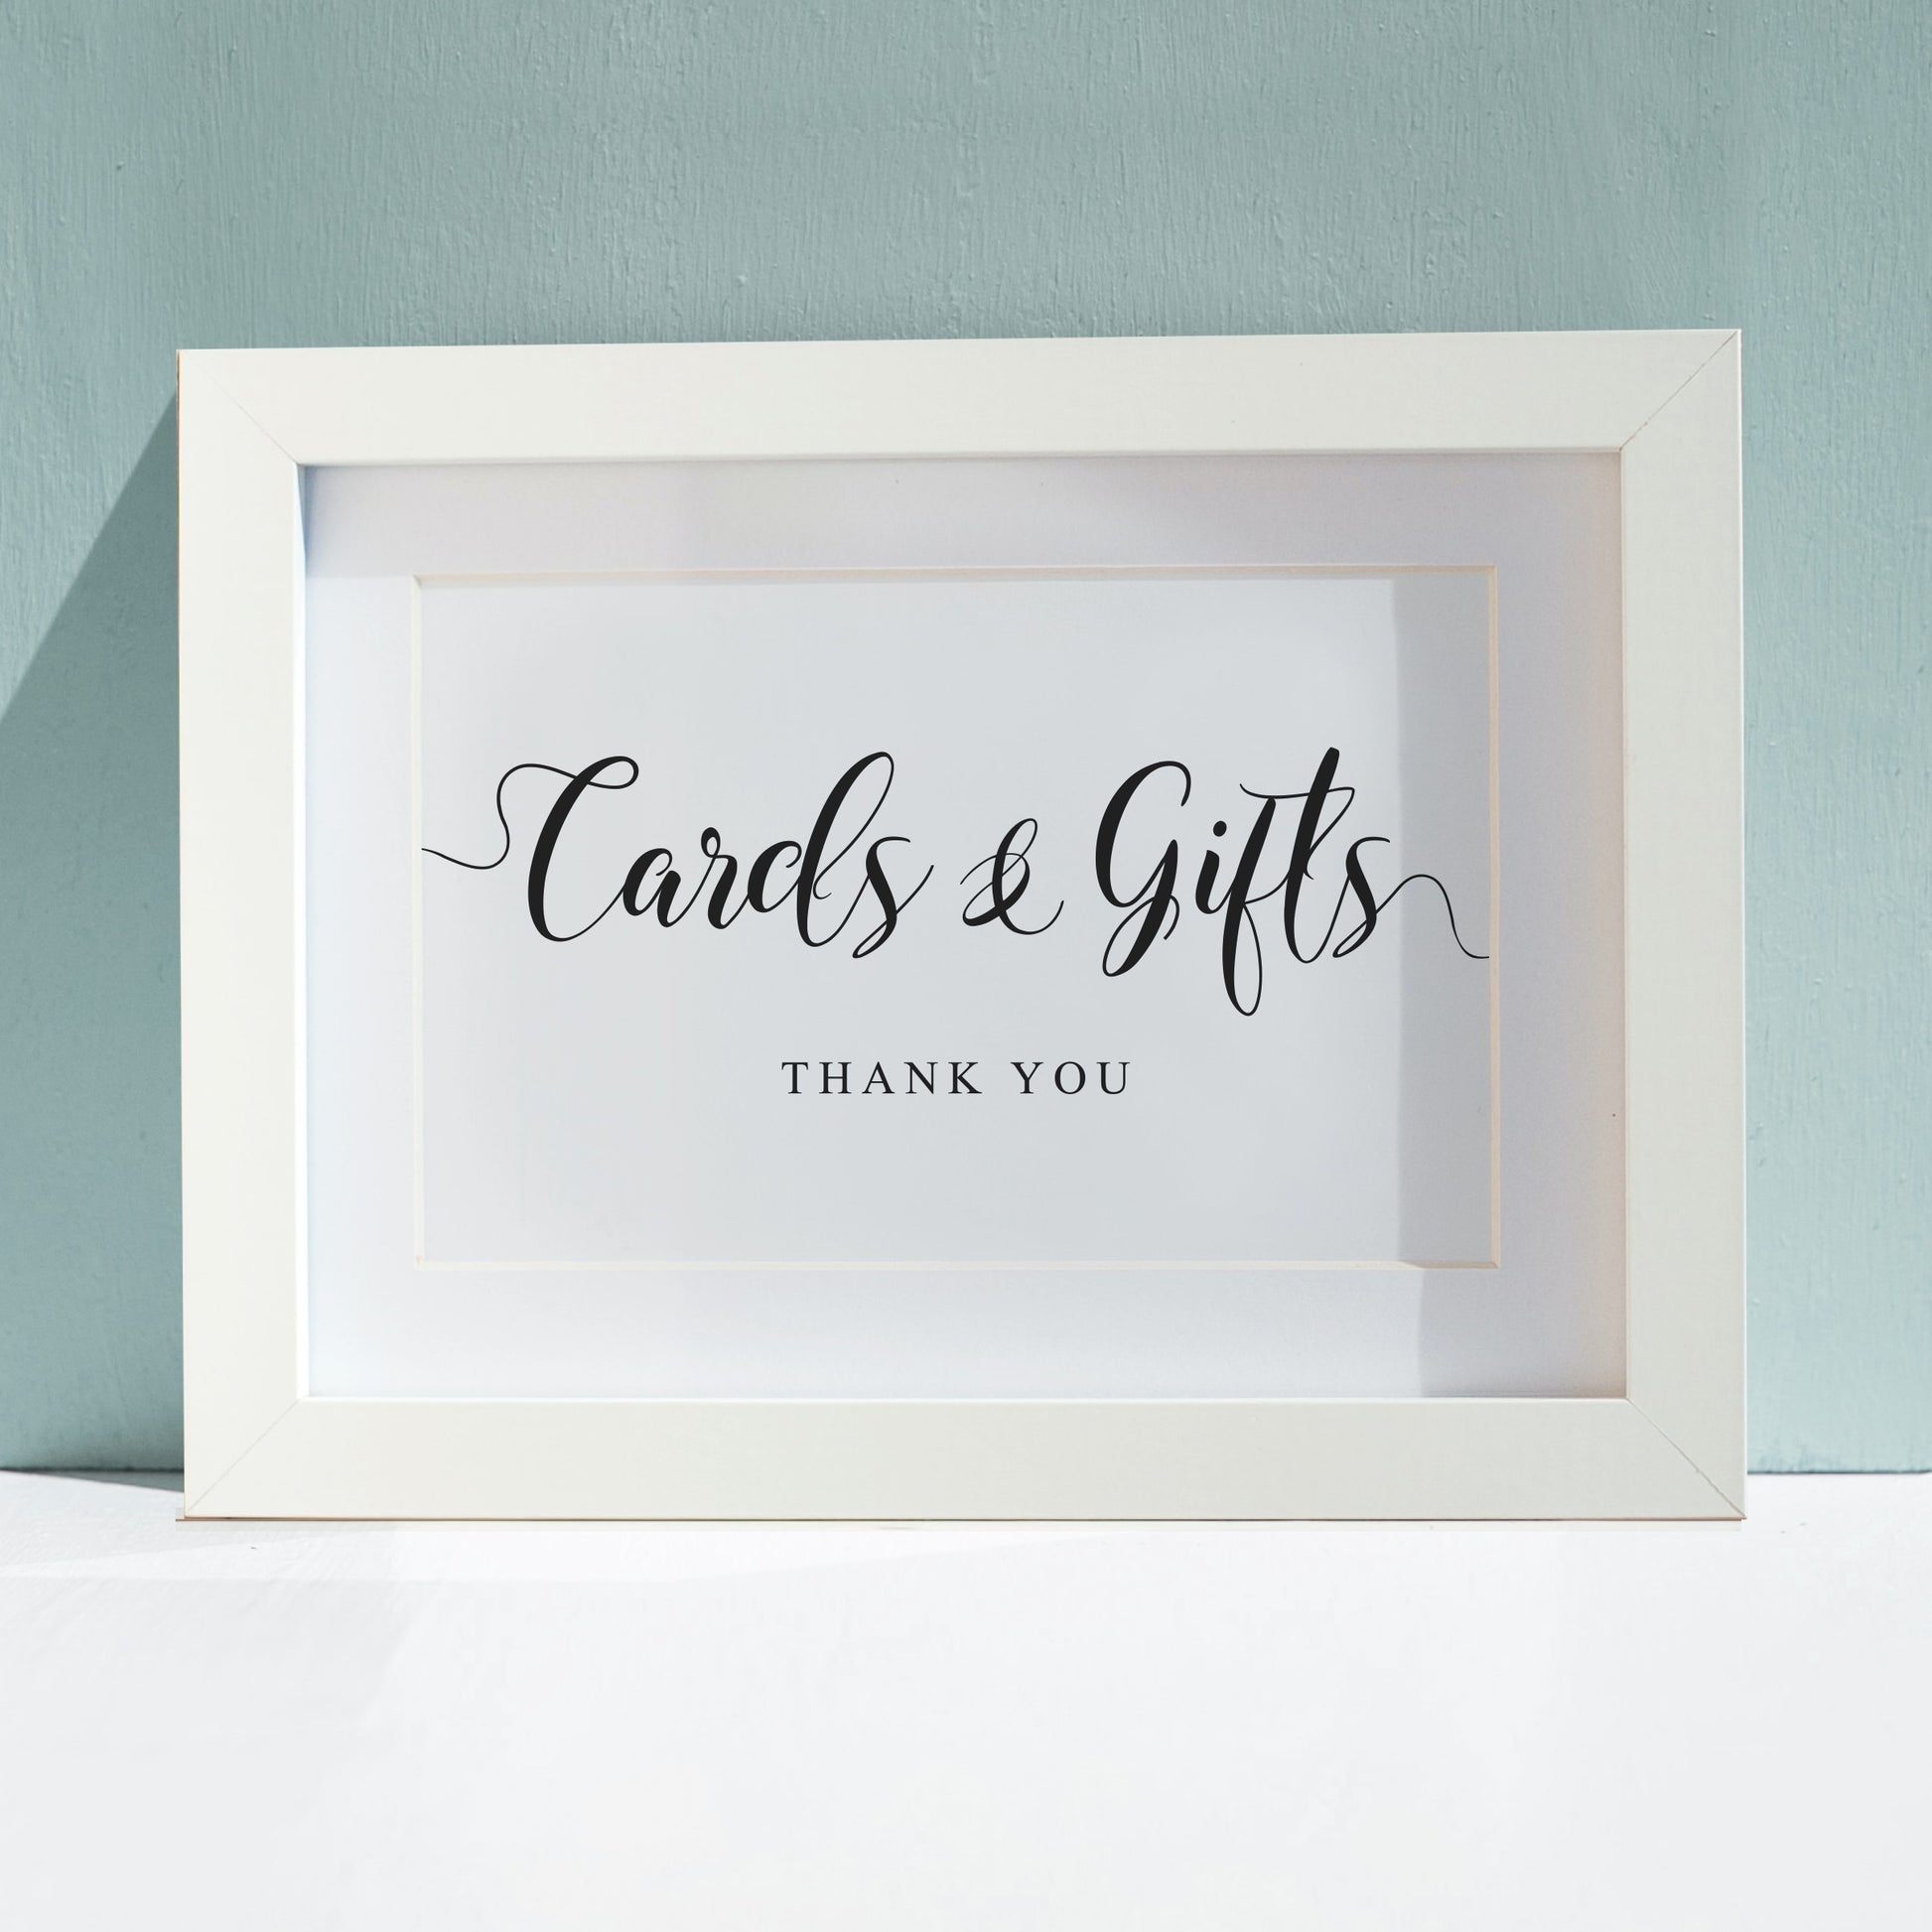 Wedding cards and gifts sign printed in a frame